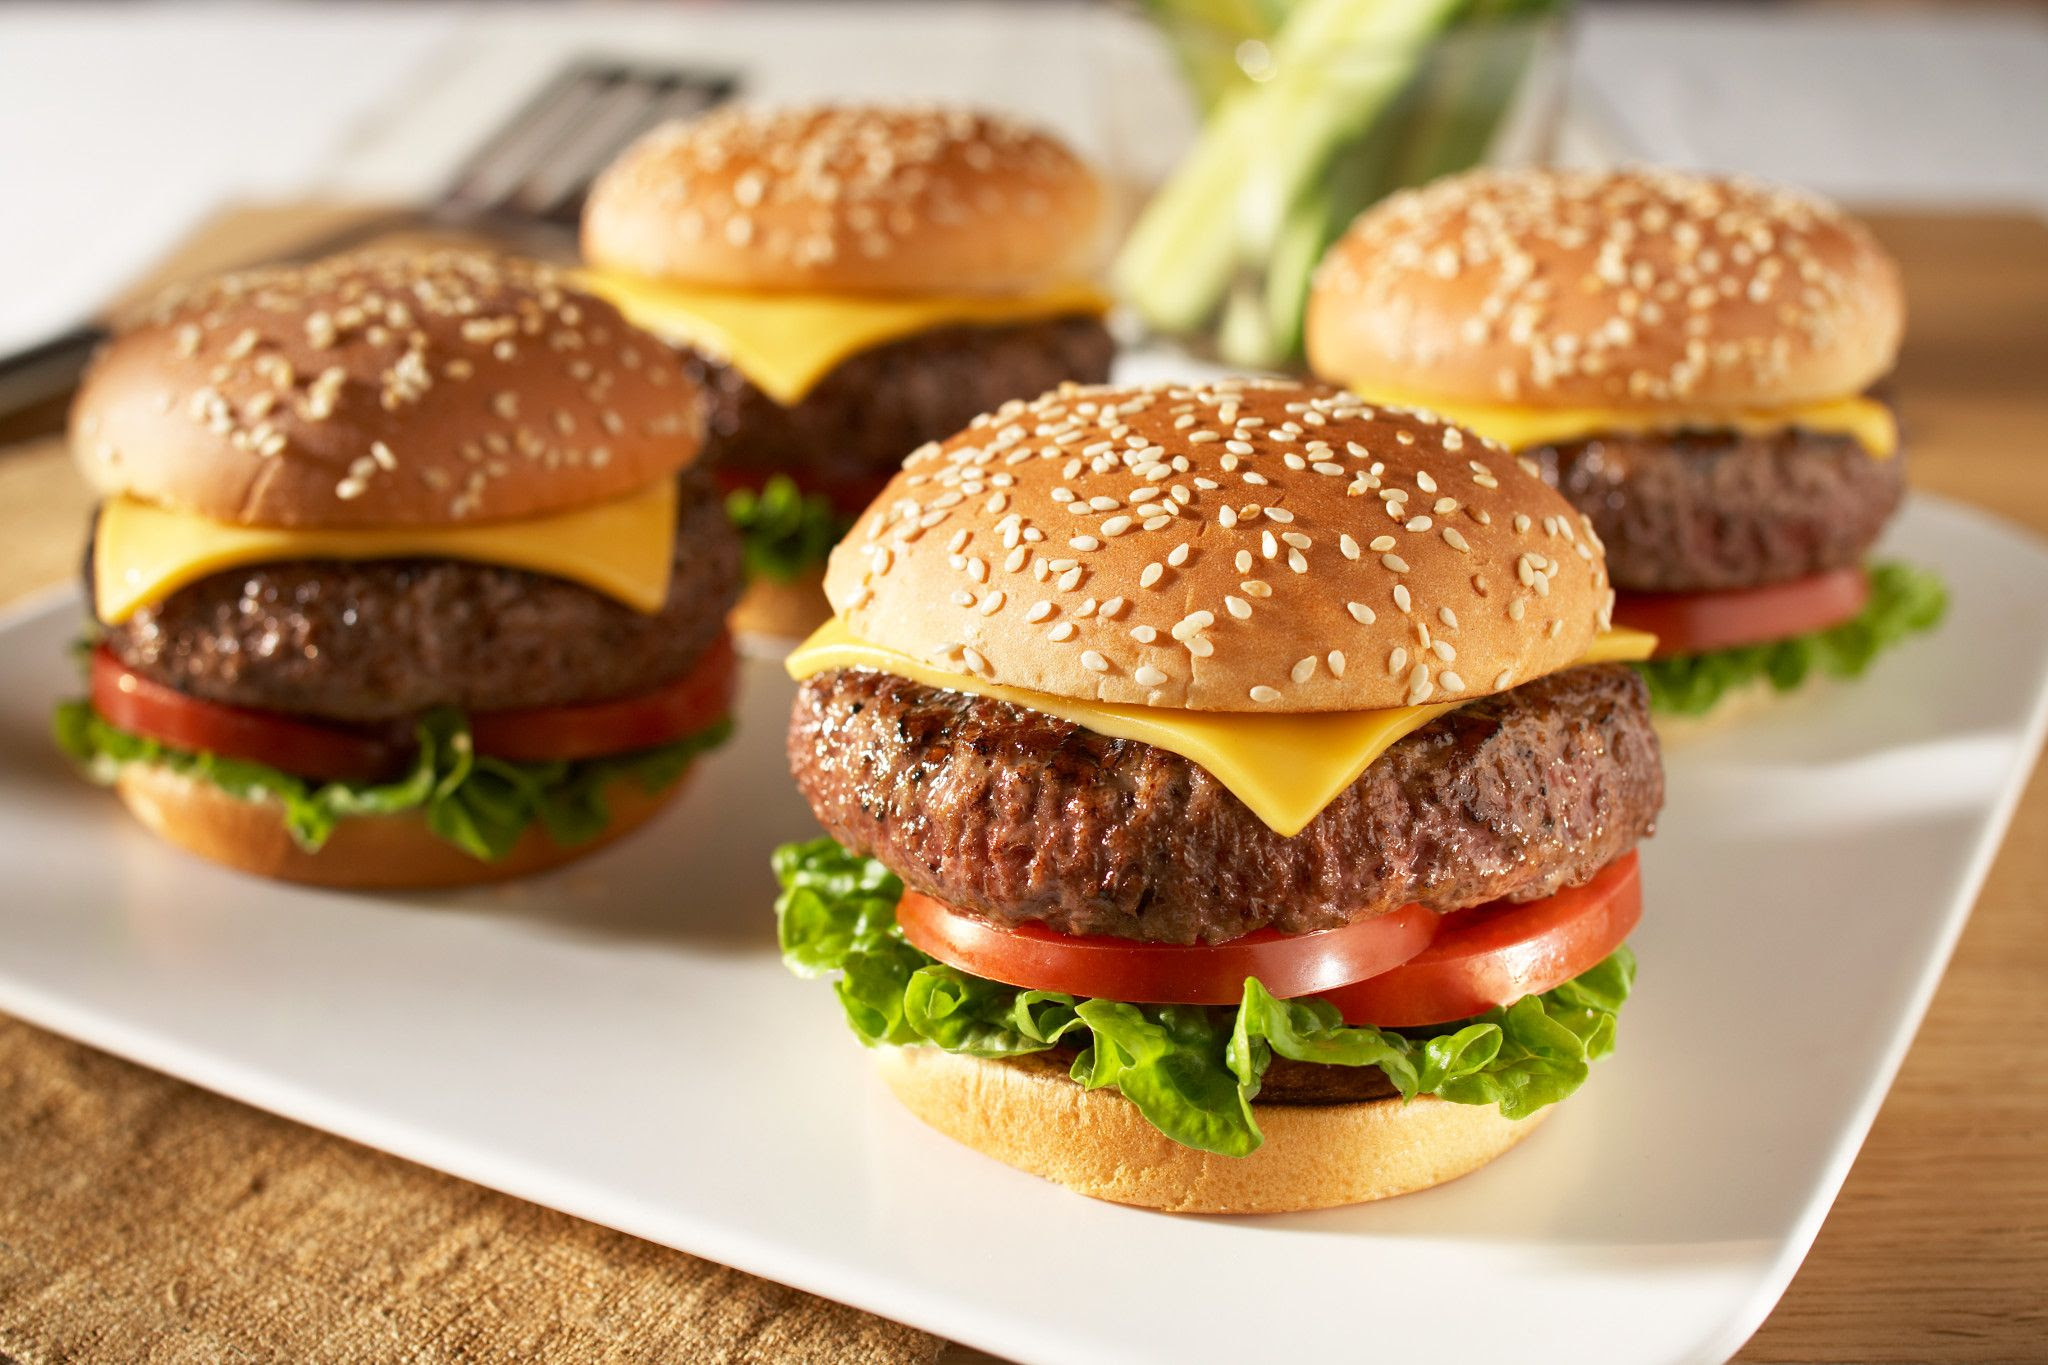 For an even lighter version, pass on the buns and serve with lettuce leaves, sliced onion and chopped tomato. Classic Beef Cheeseburgers